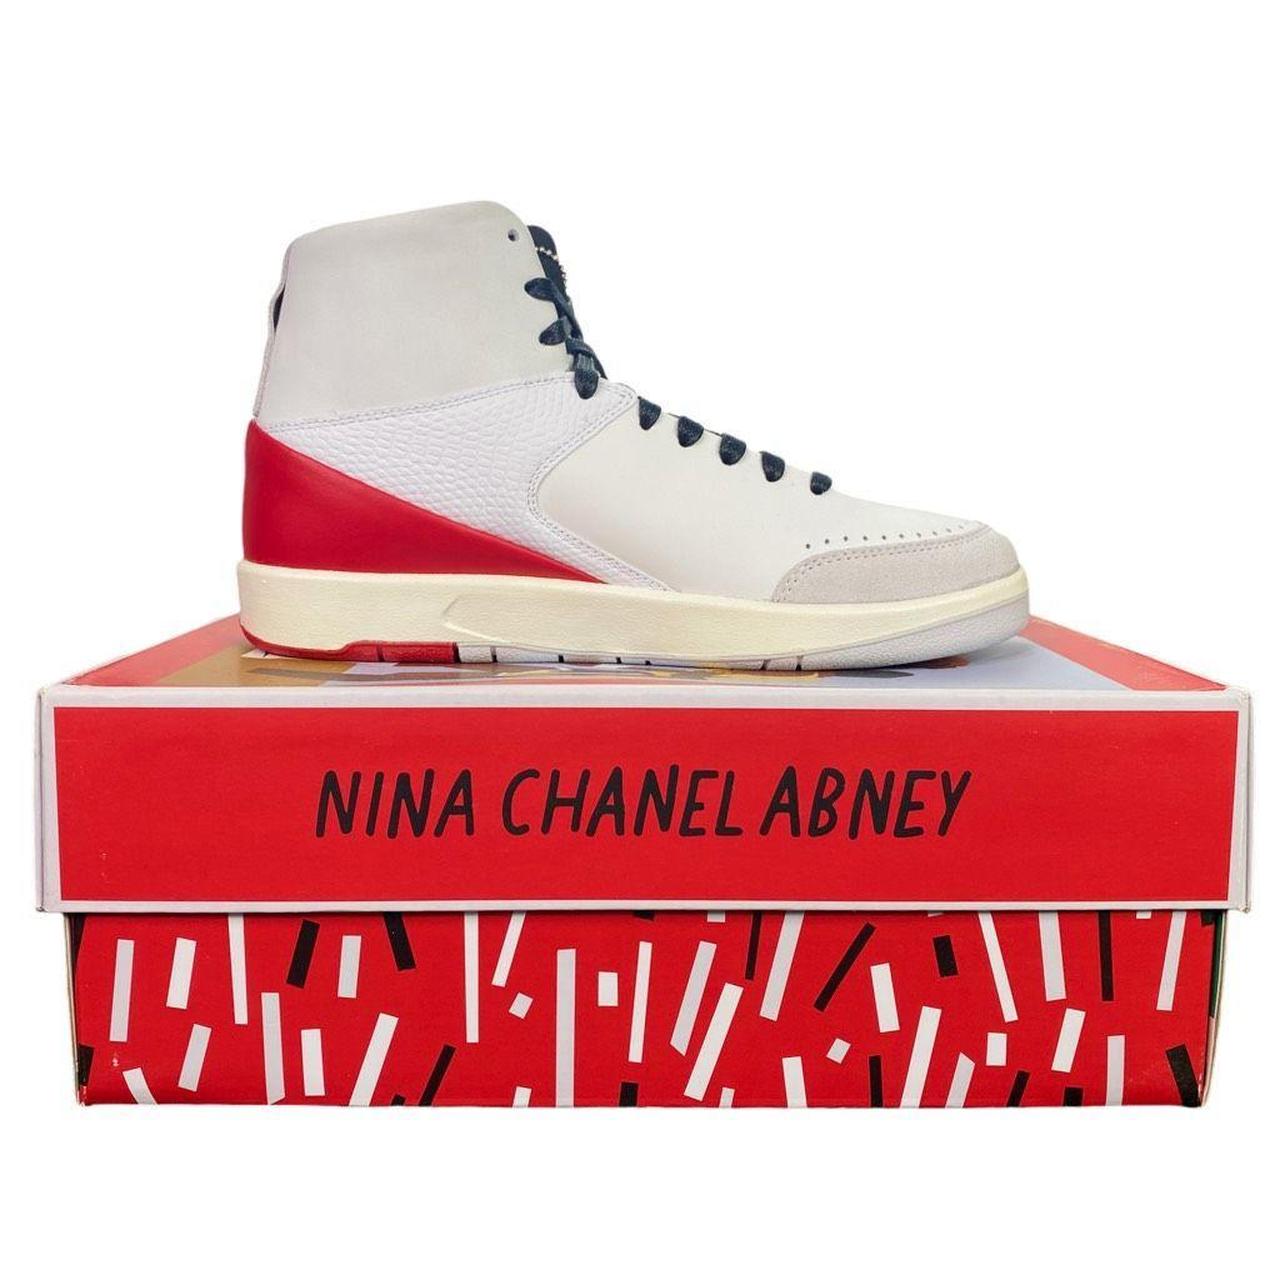 Nina Chanel Abney's Air Jordan 2 Pack Release Update - Fastsole